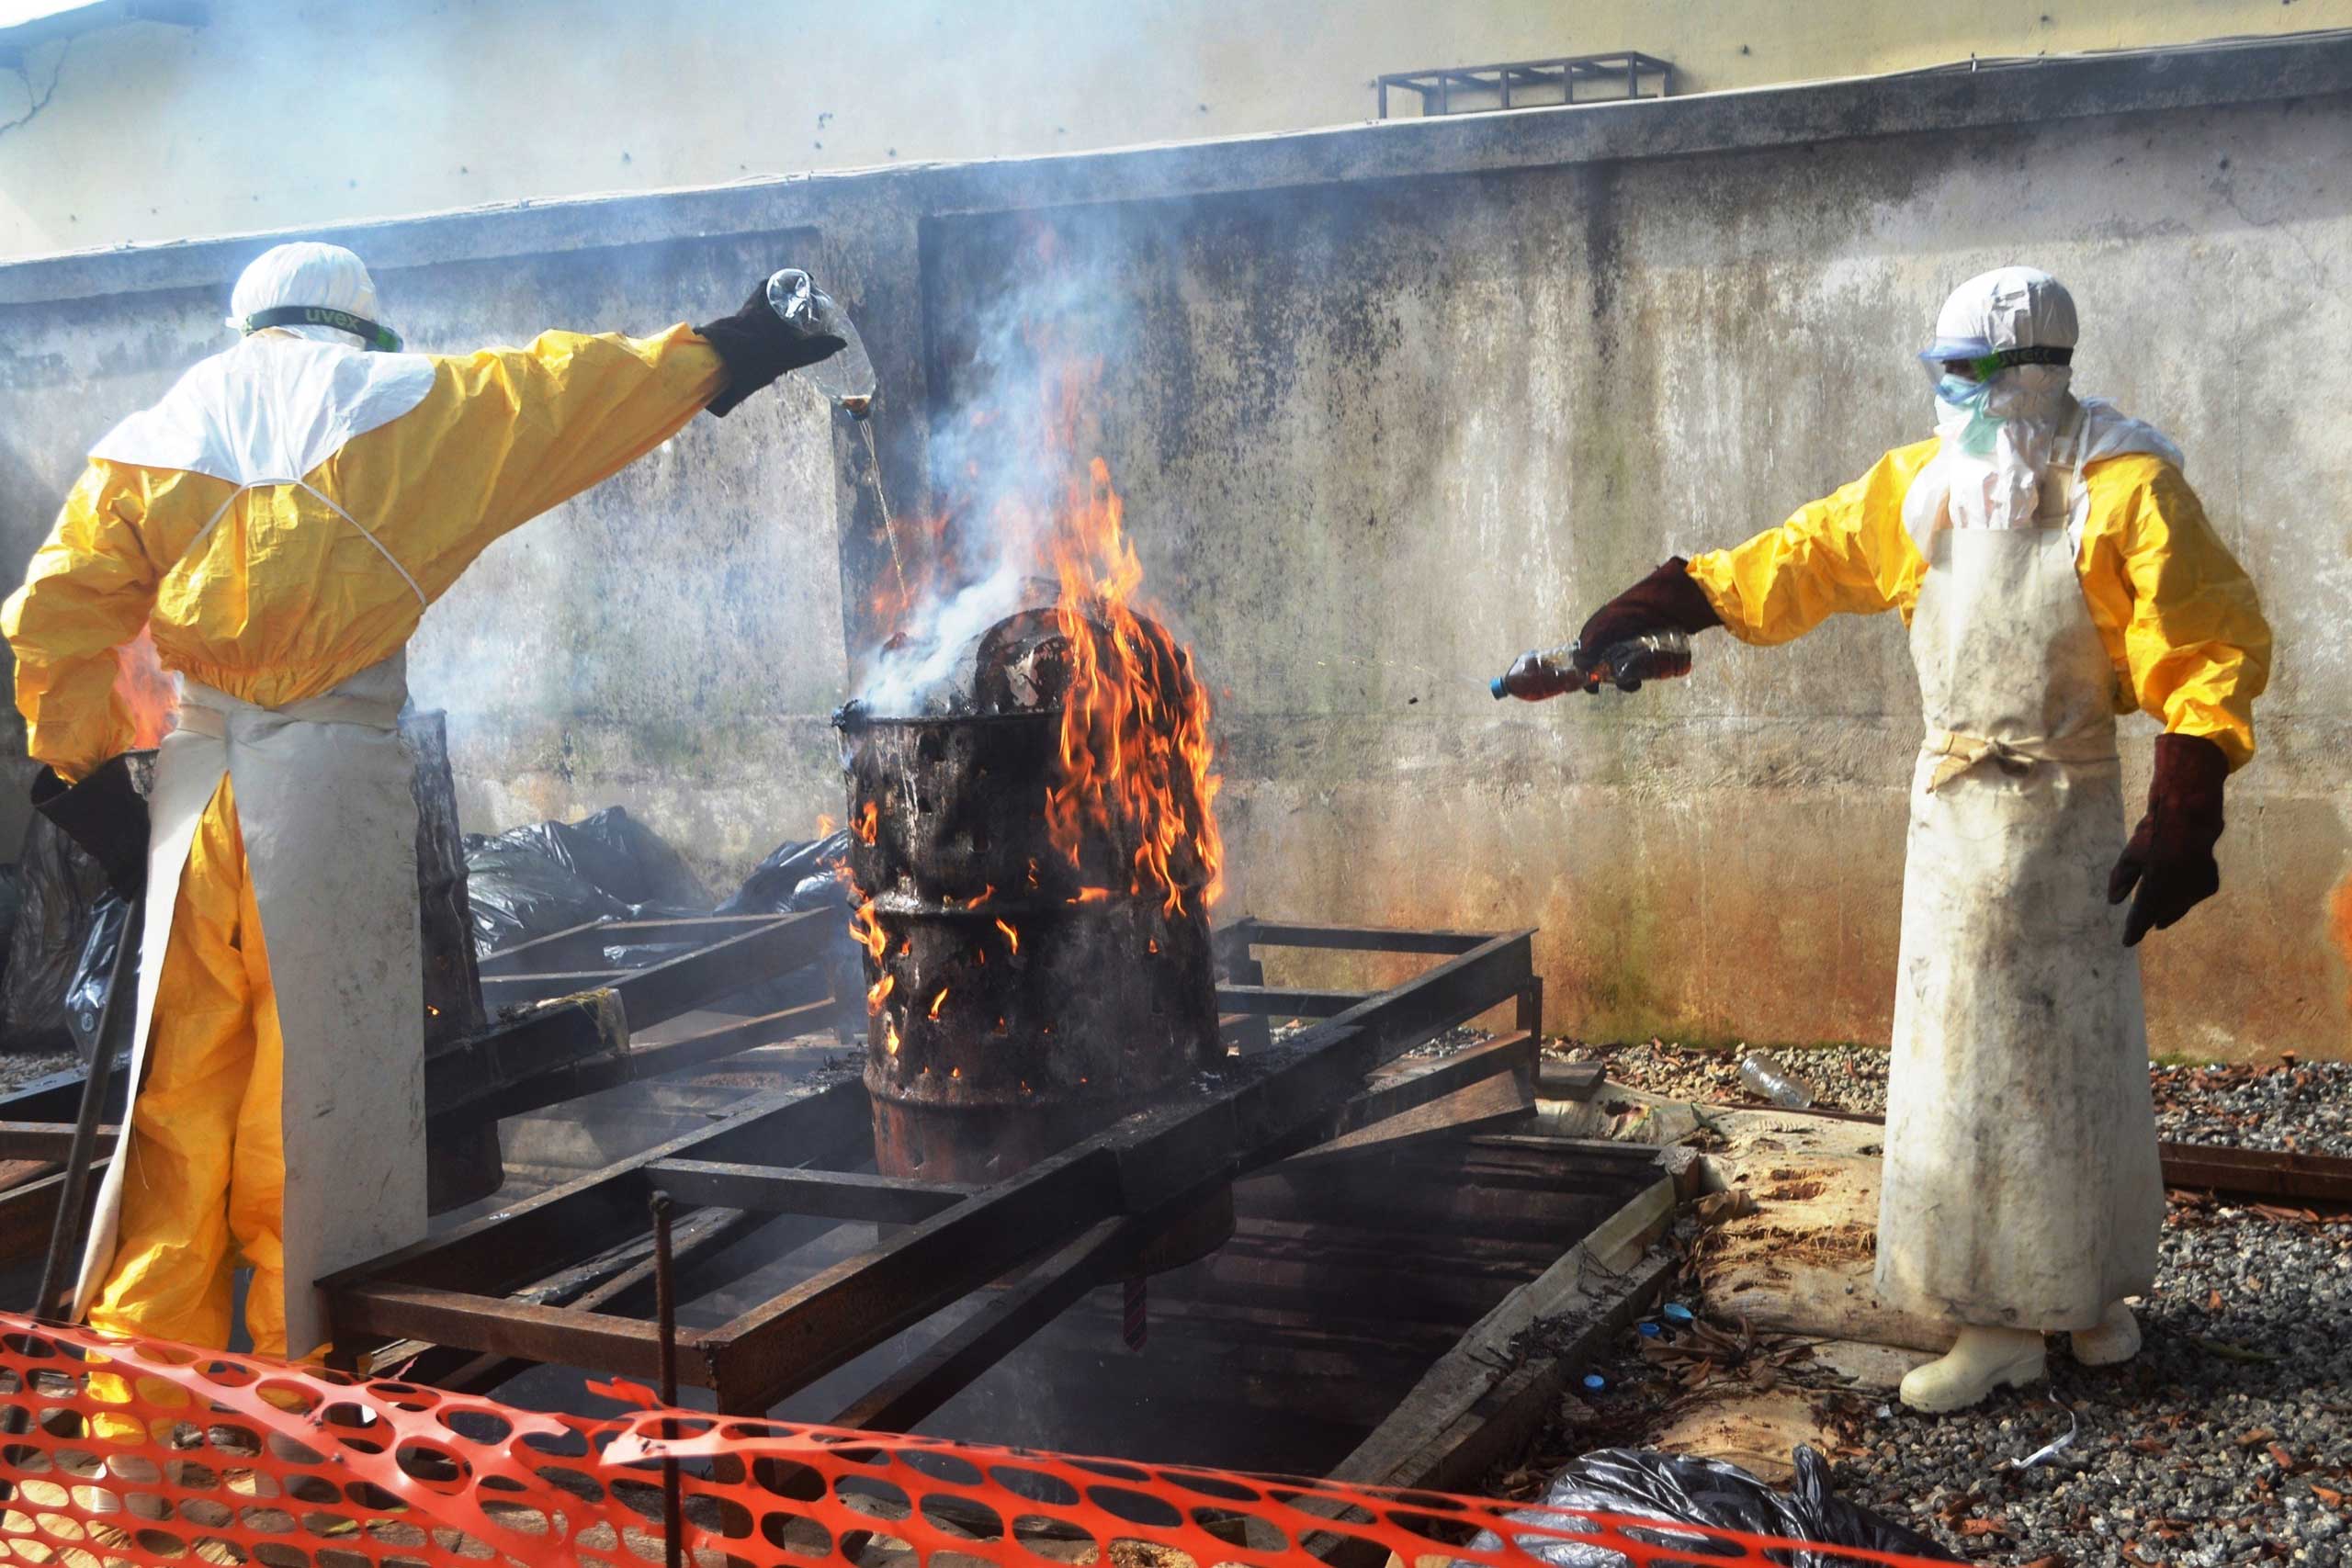 Sept. 13, 2014. Health workers burn used protection gear at a Medecins Sans Frontieres center in Conakry, Guinea.